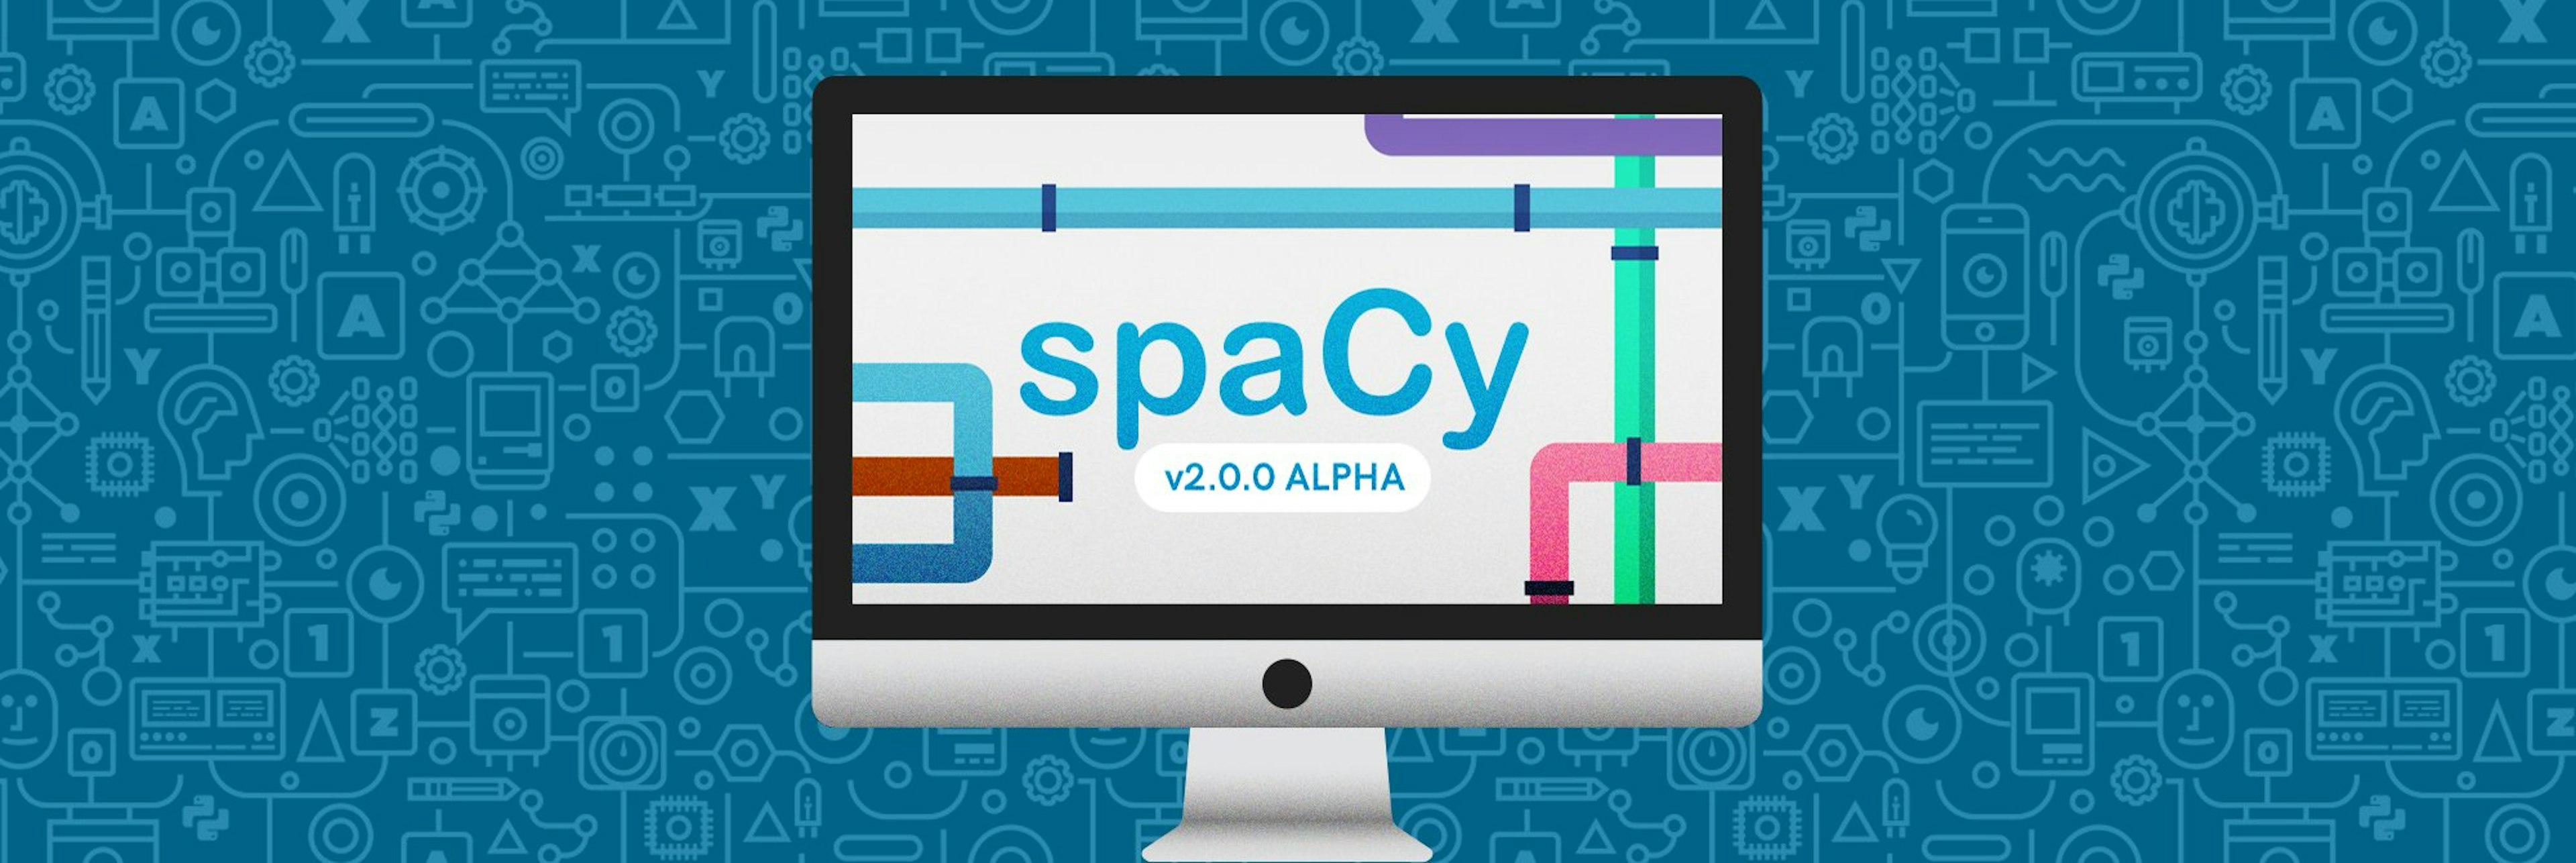 Introducing custom pipelines and extensions for spaCy v2.0